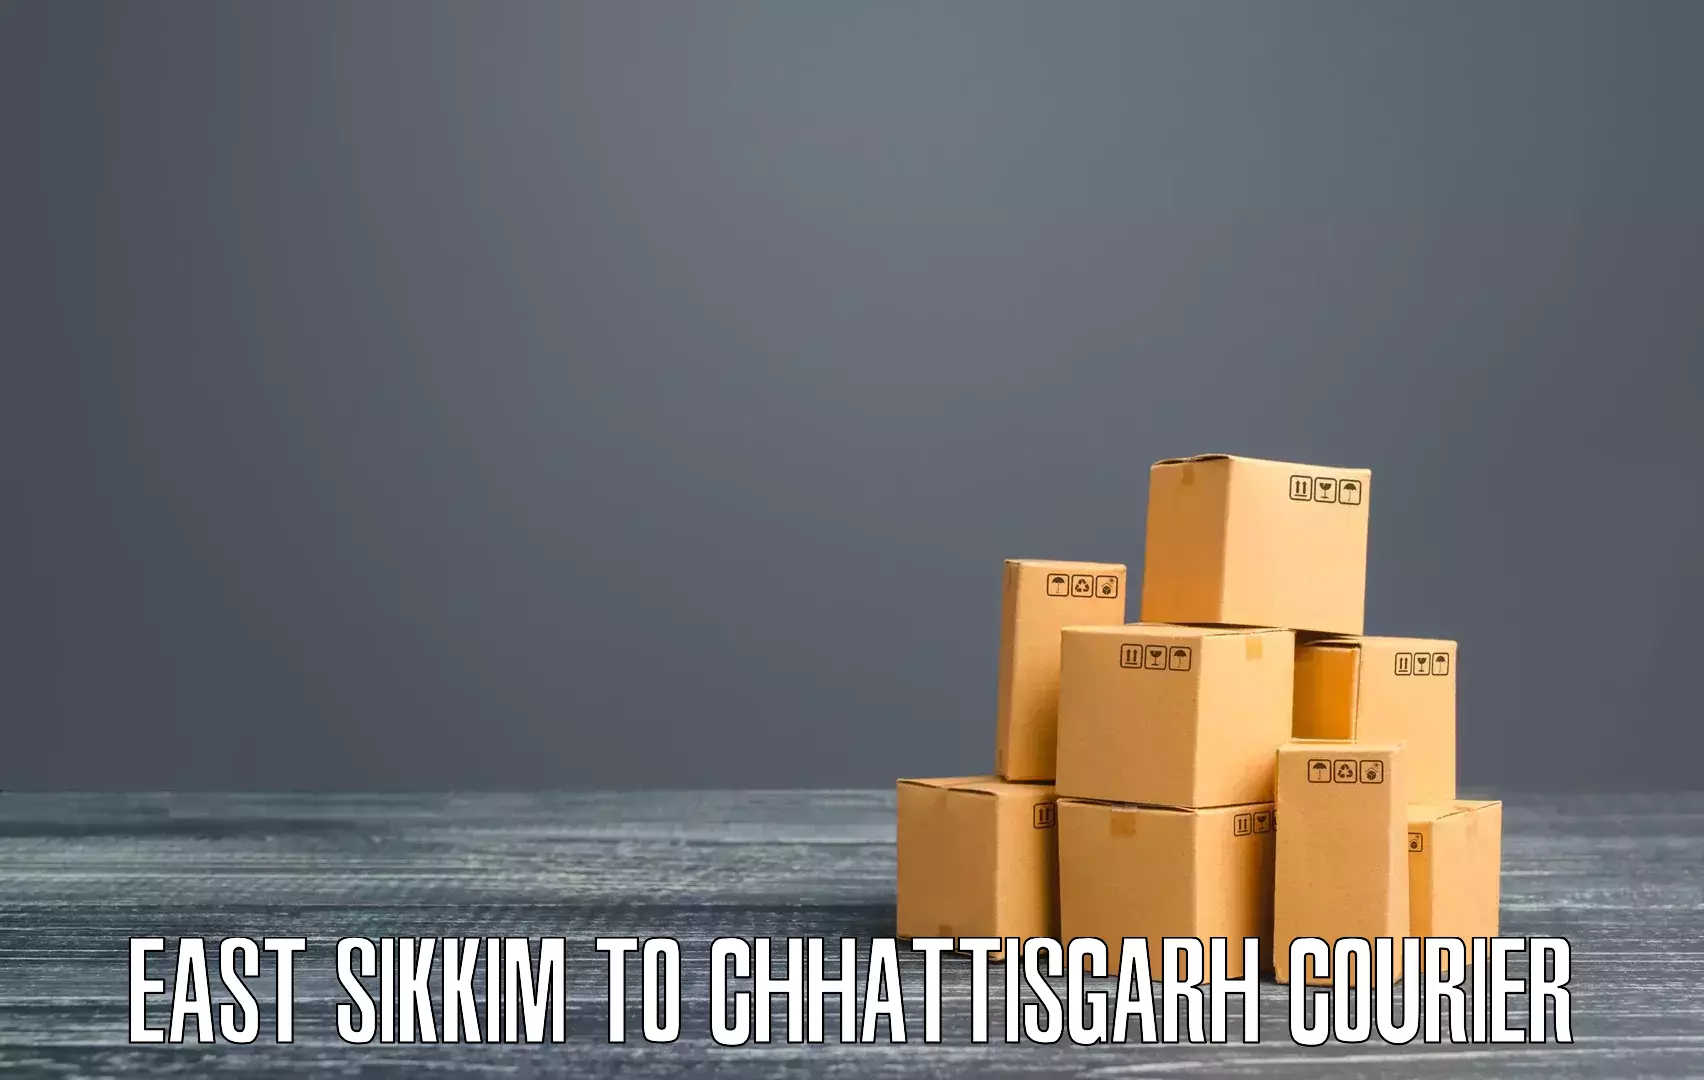 End-to-end delivery East Sikkim to Chhattisgarh